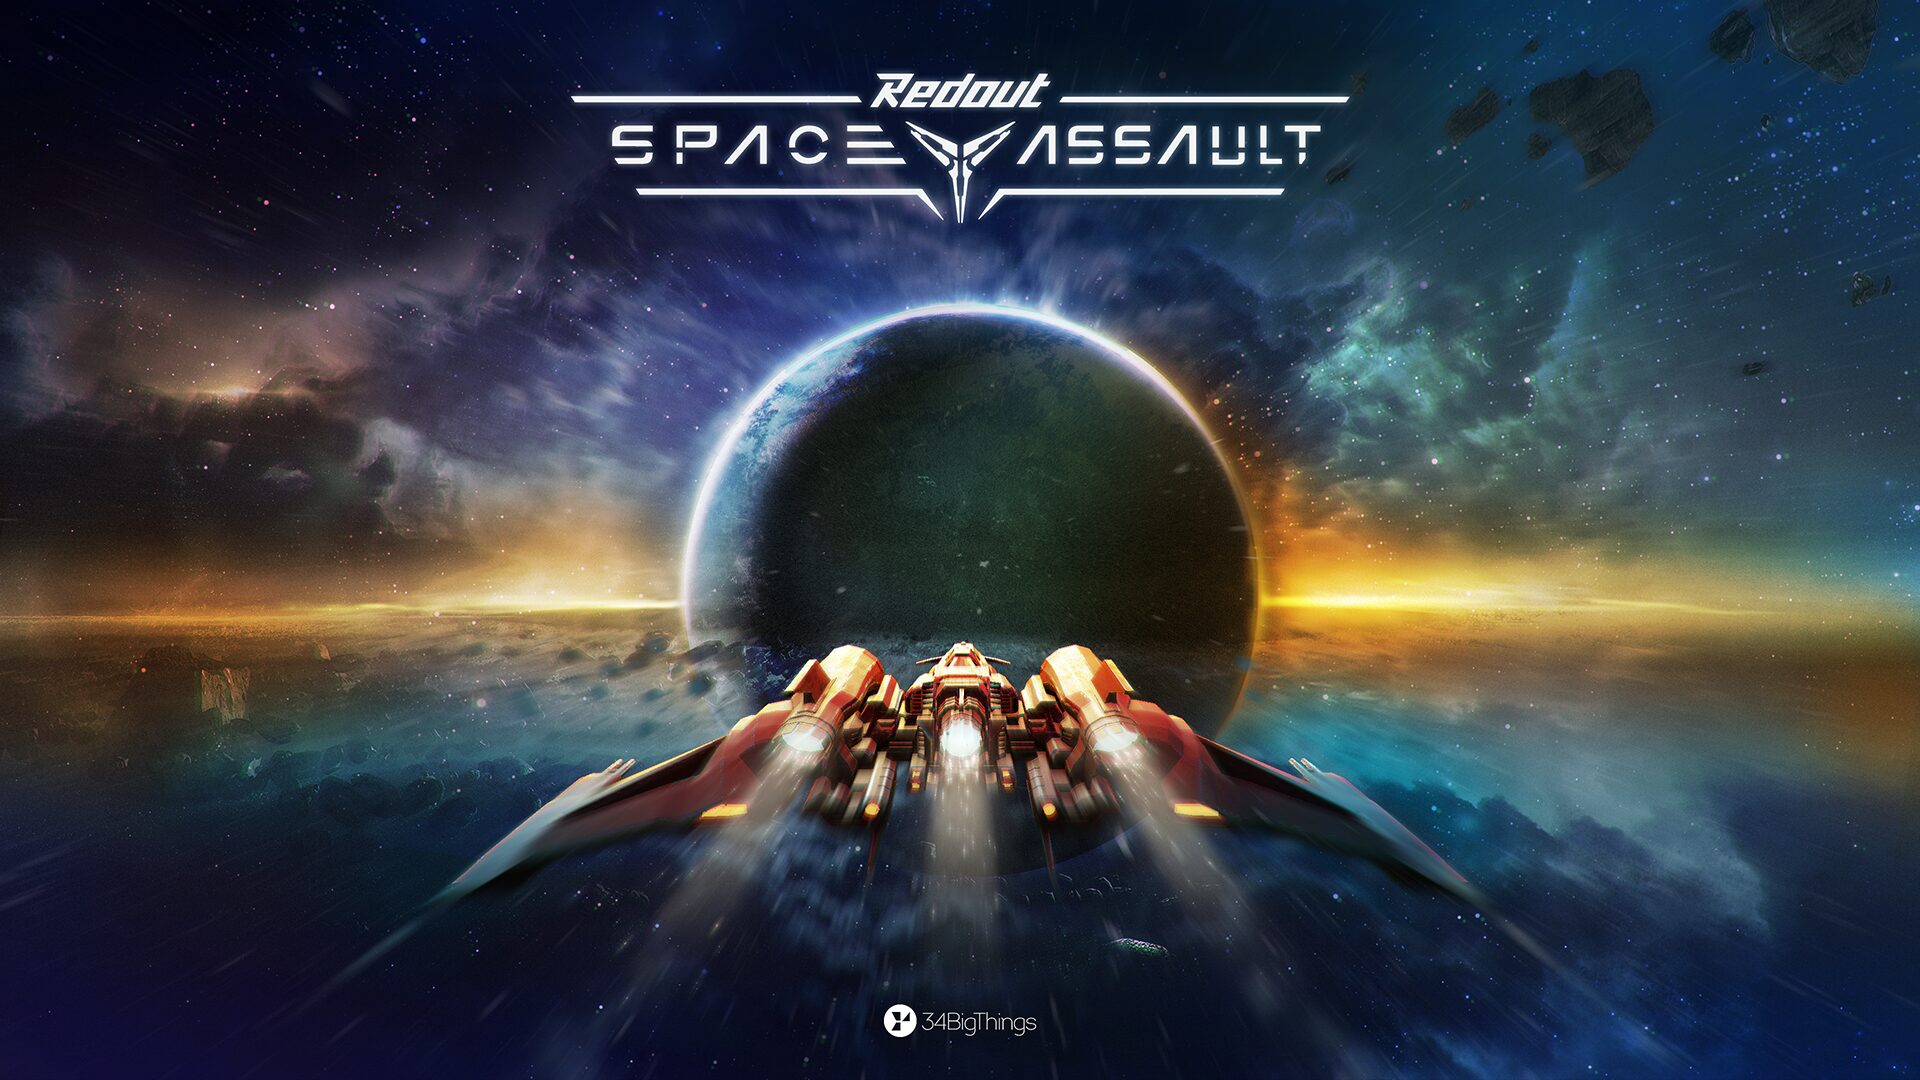 Redout: Space Assault debuts first in-game footage